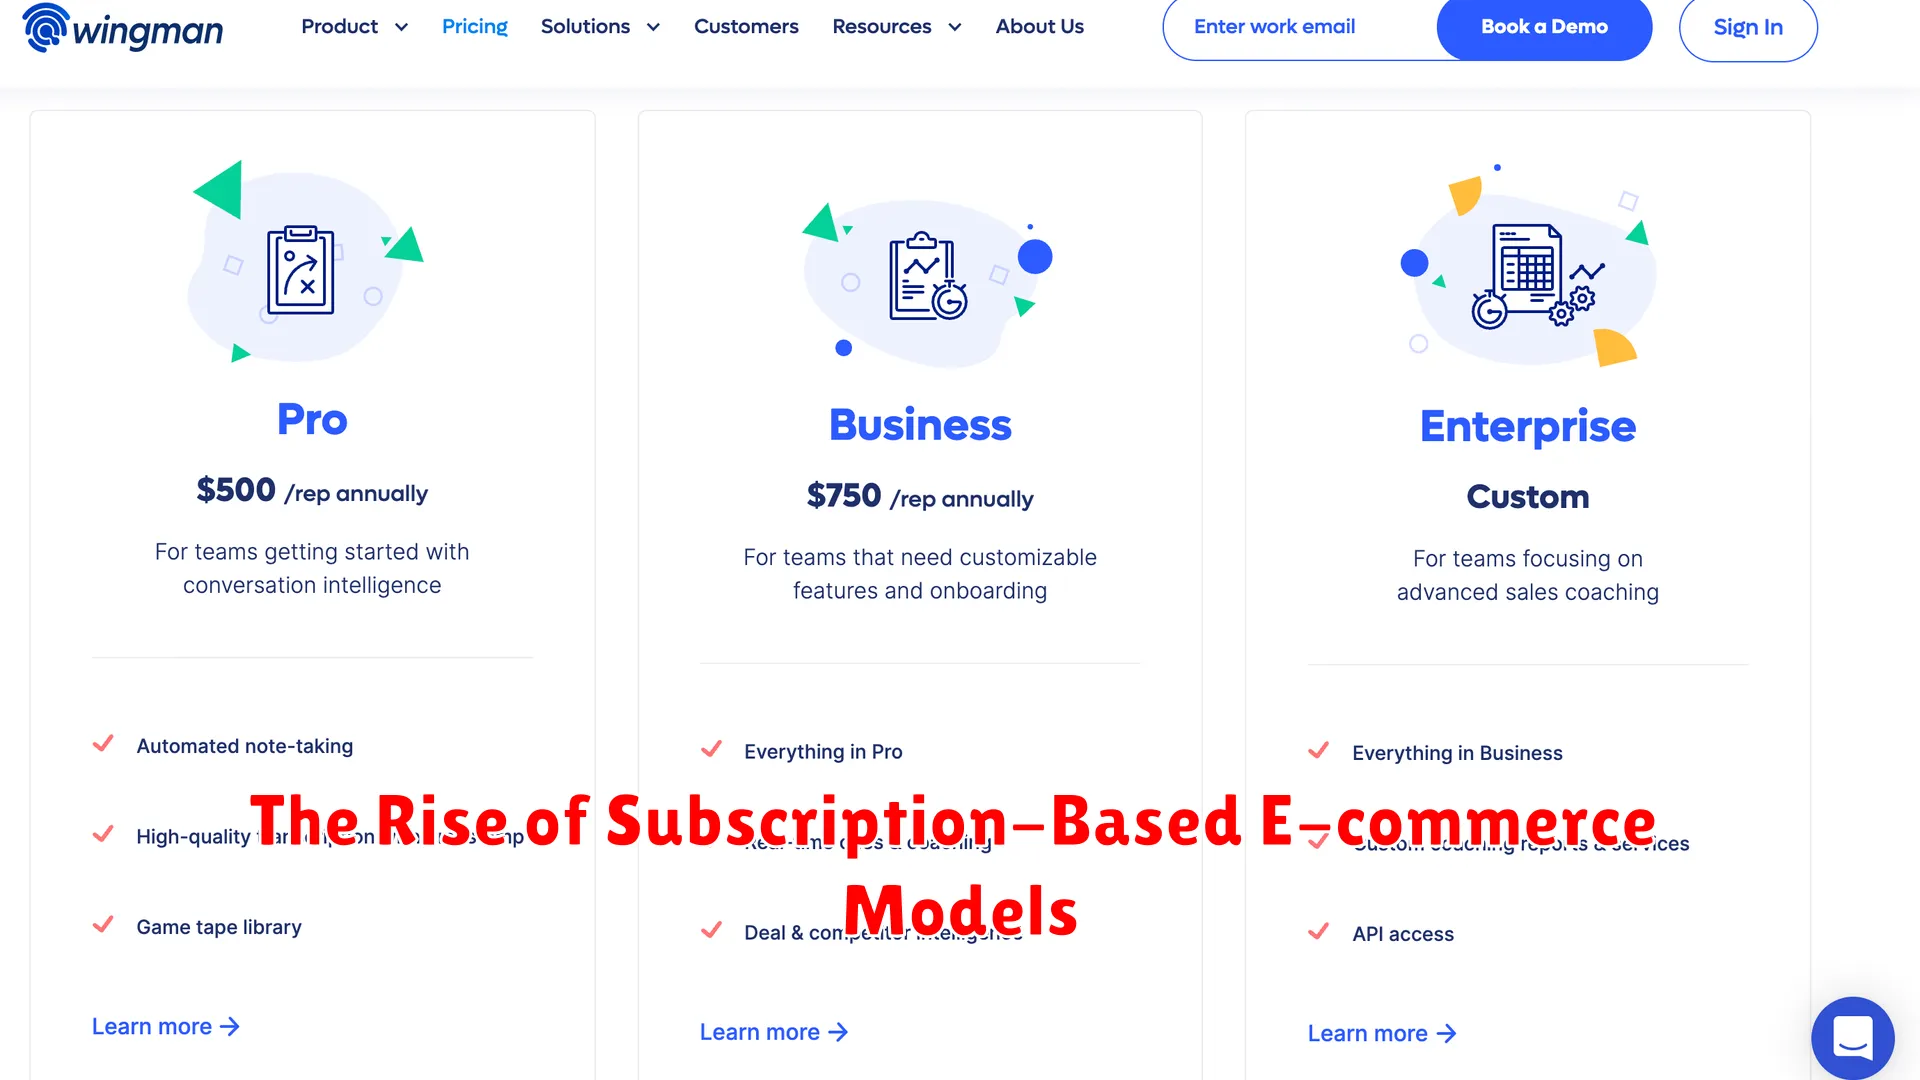 The Rise of Subscription-Based E-commerce Models